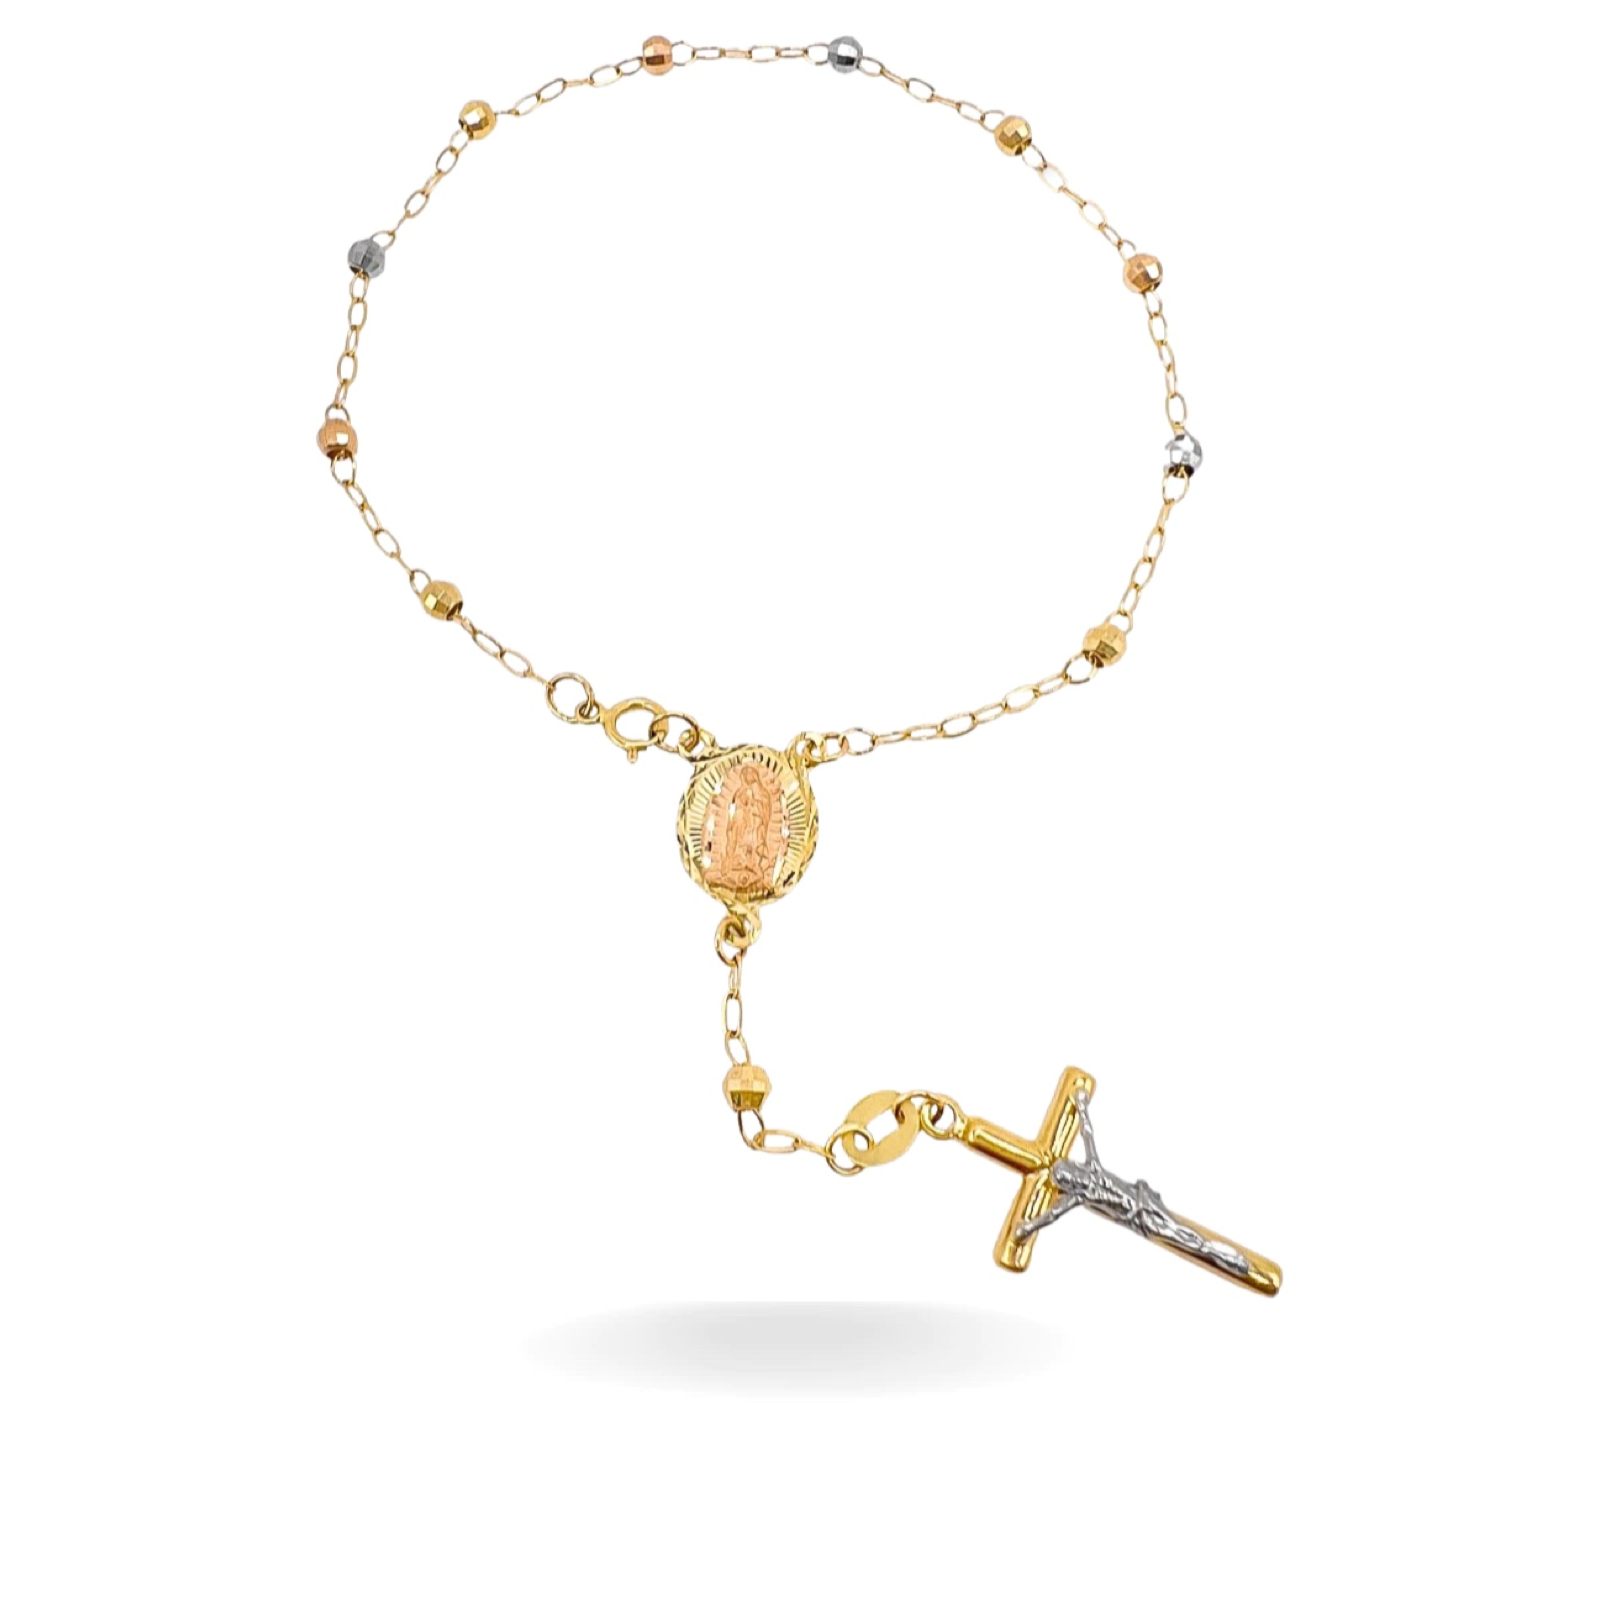 Yellow rose gold rosary bracelet☆ russiangold.com ☆ Gold 585 333 Low price